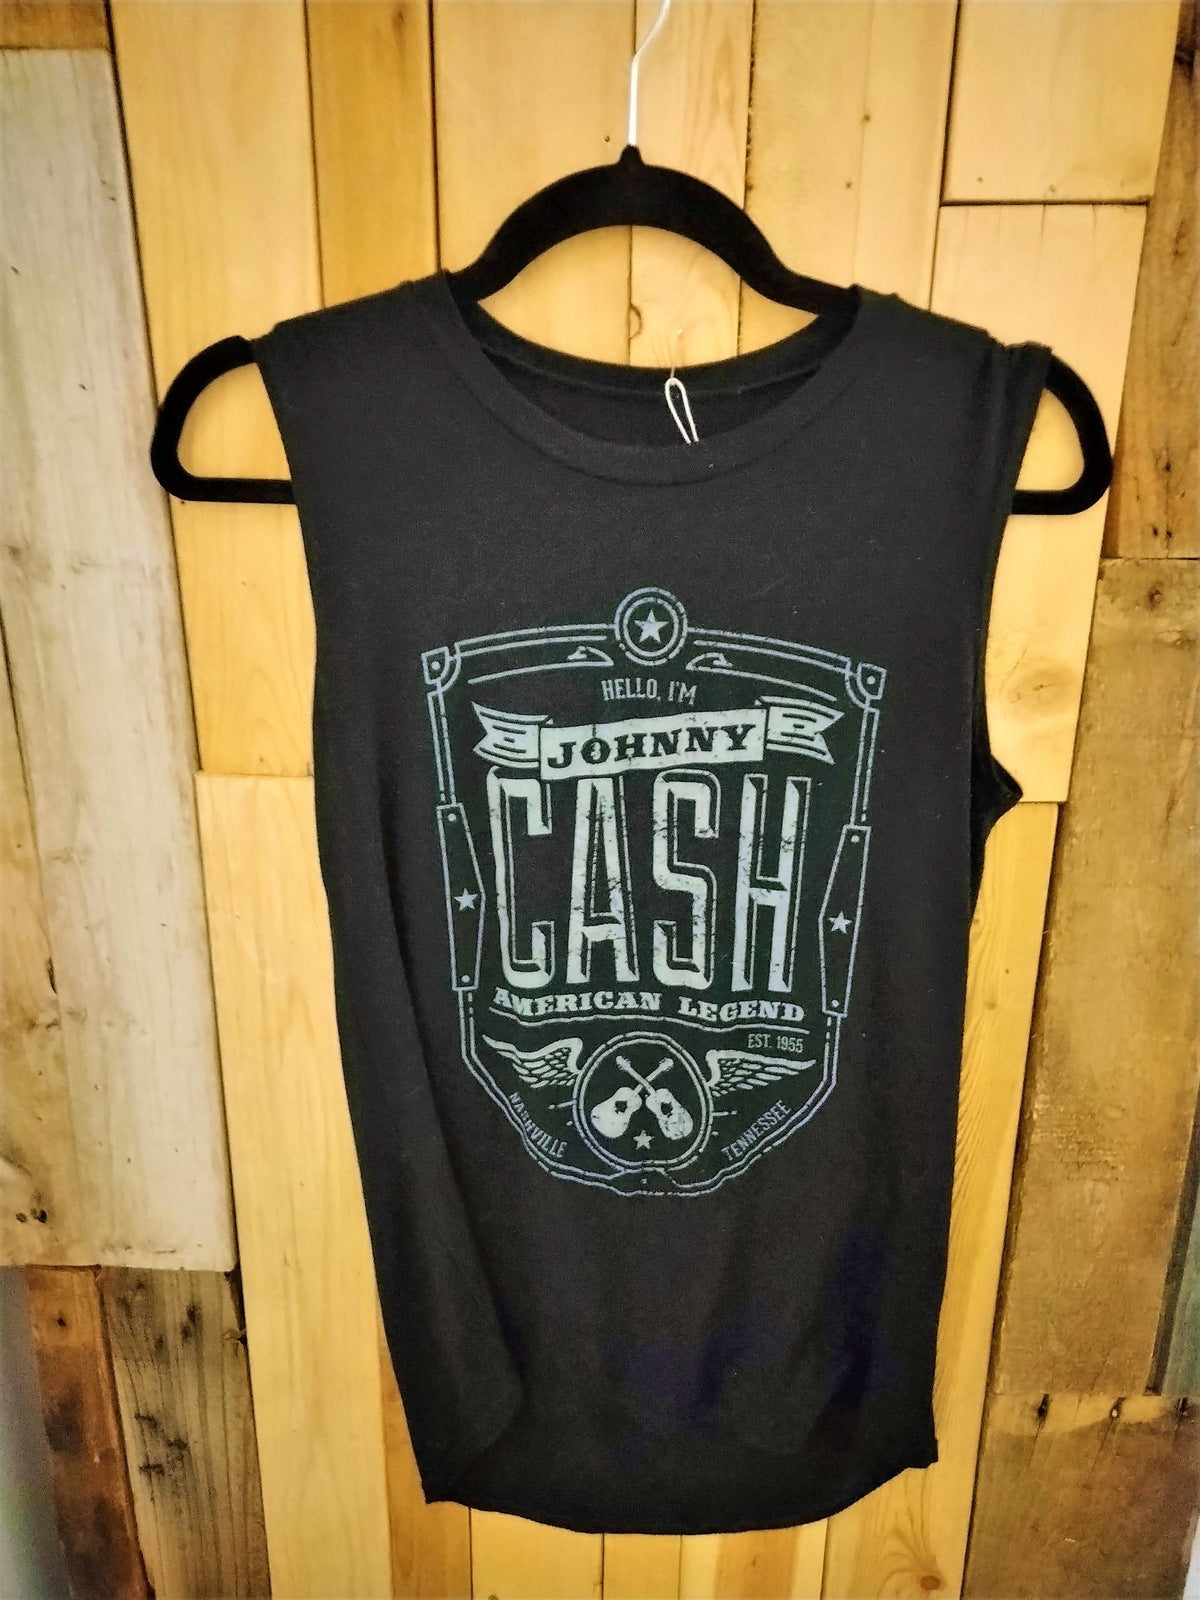 Johnny Cash American Legend Muscle Tee Shirt Size Small